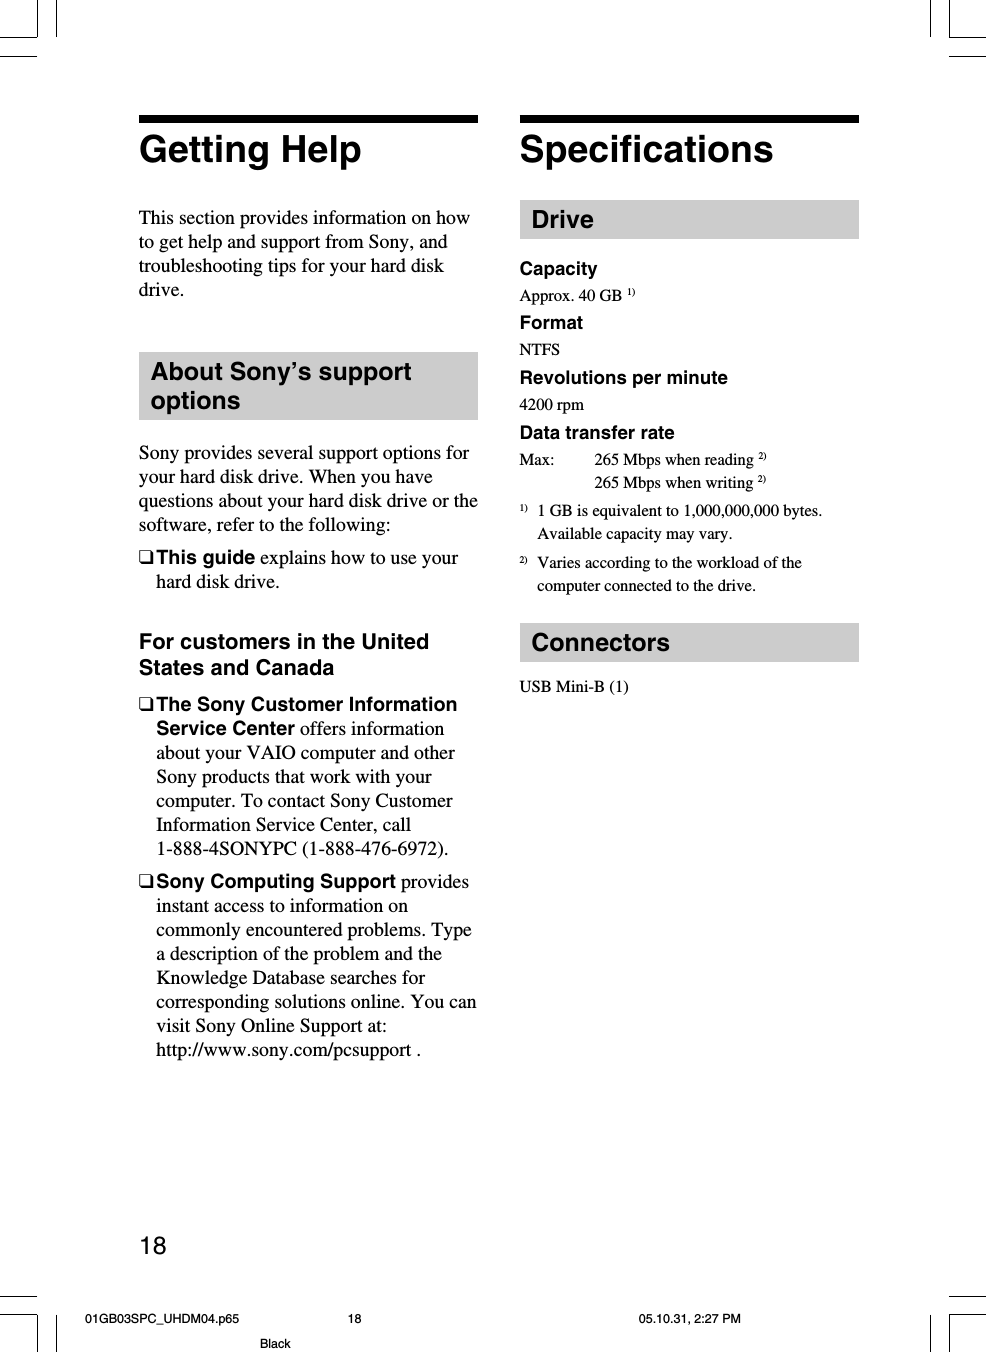 18Getting HelpThis section provides information on howto get help and support from Sony, andtroubleshooting tips for your hard diskdrive.About Sony’s supportoptionsSony provides several support options foryour hard disk drive. When you havequestions about your hard disk drive or thesoftware, refer to the following:❑This guide explains how to use yourhard disk drive.For customers in the UnitedStates and Canada❑The Sony Customer InformationService Center offers informationabout your VAIO computer and otherSony products that work with yourcomputer. To contact Sony CustomerInformation Service Center, call1-888-4SONYPC (1-888-476-6972).❑Sony Computing Support providesinstant access to information oncommonly encountered problems. Typea description of the problem and theKnowledge Database searches forcorresponding solutions online. You canvisit Sony Online Support at:http://www.sony.com/pcsupport .SpecificationsDriveCapacityApprox. 40 GB 1)FormatNTFSRevolutions per minute4200 rpmData transfer rateMax:265 Mbps when reading 2)265 Mbps when writing 2)1) 1 GB is equivalent to 1,000,000,000 bytes.Available capacity may vary.2) Varies according to the workload of thecomputer connected to the drive.ConnectorsUSB Mini-B (1)01GB03SPC_UHDM04.p65 05.10.31, 2:27 PM18Black